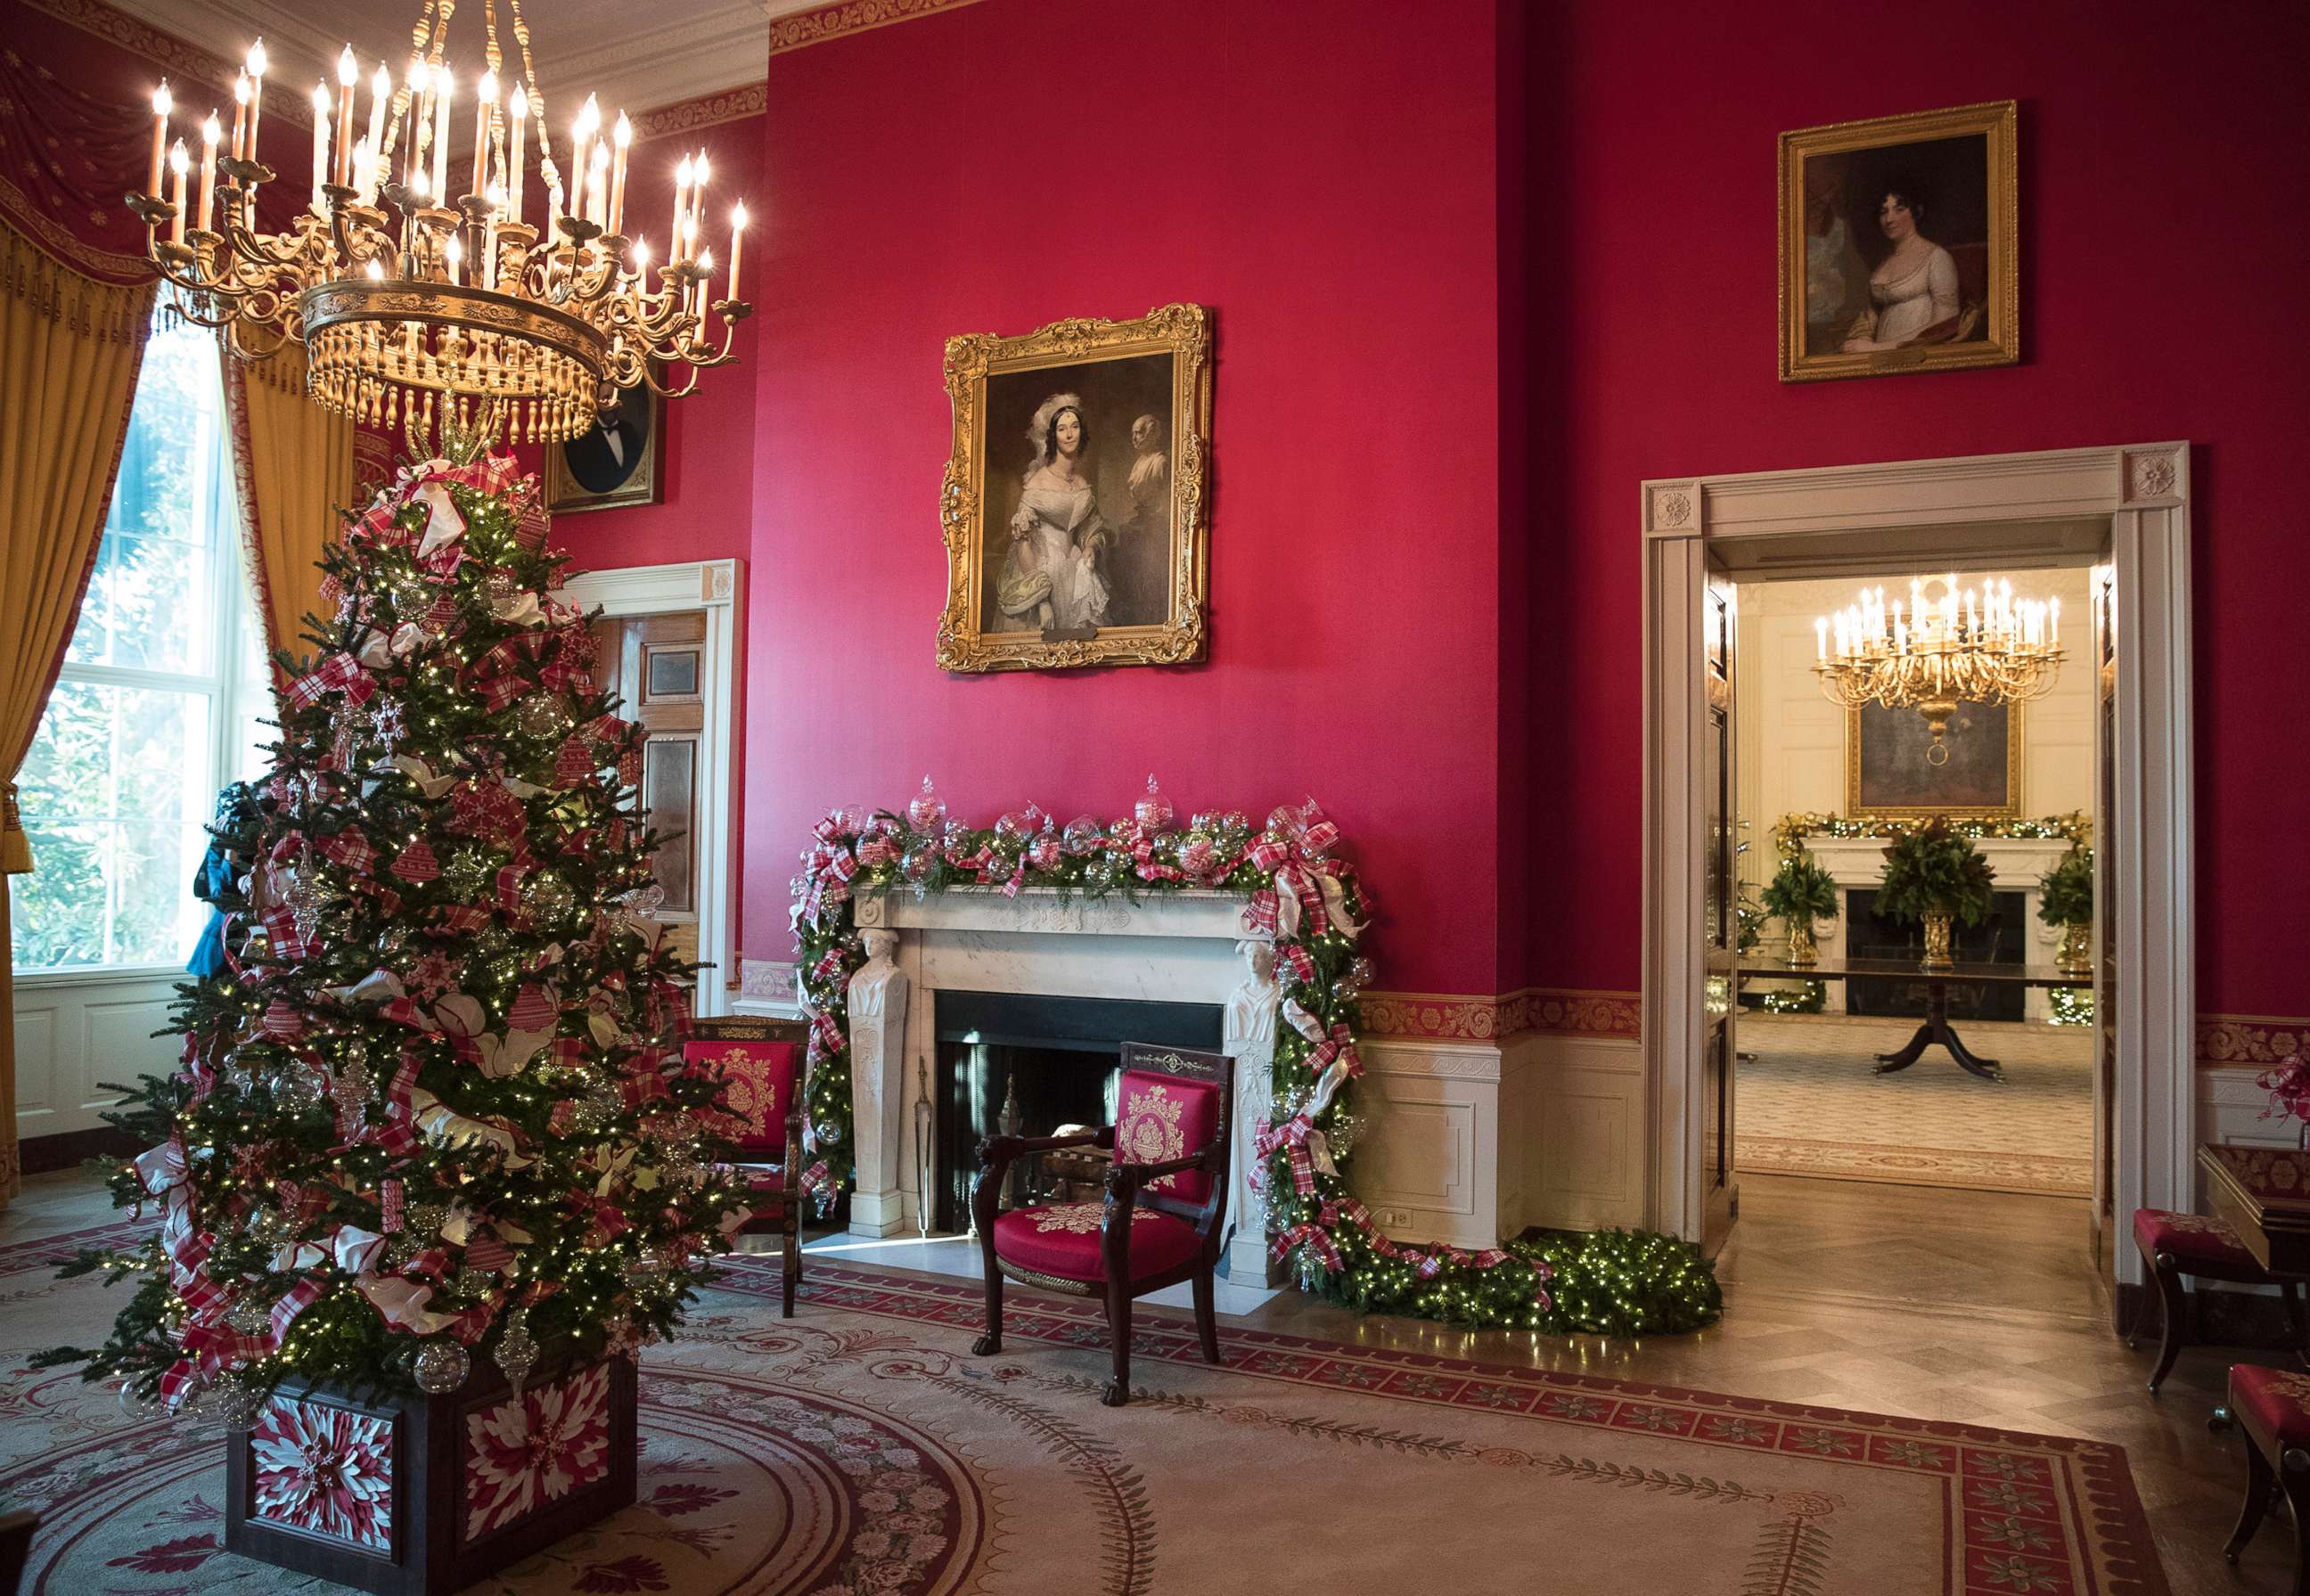 PHOTO: The Red Room decorated as part of 2017 holiday decorations at the White House in Washington, D.C., Nov. 27, 2017.